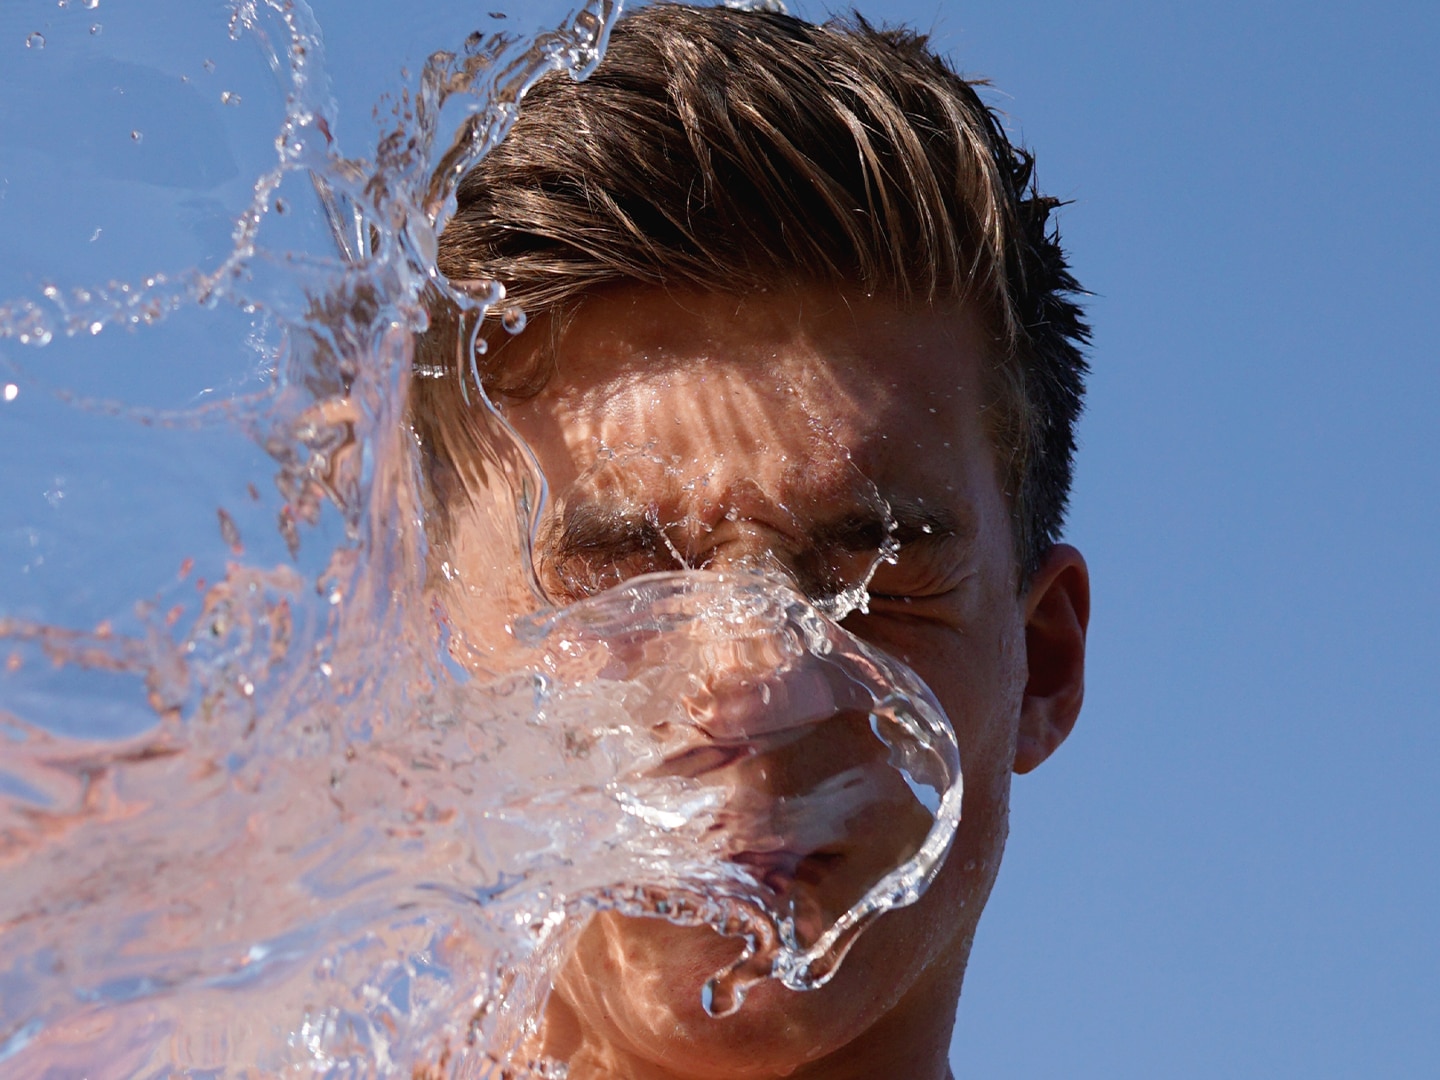 a guy splashing water into his face